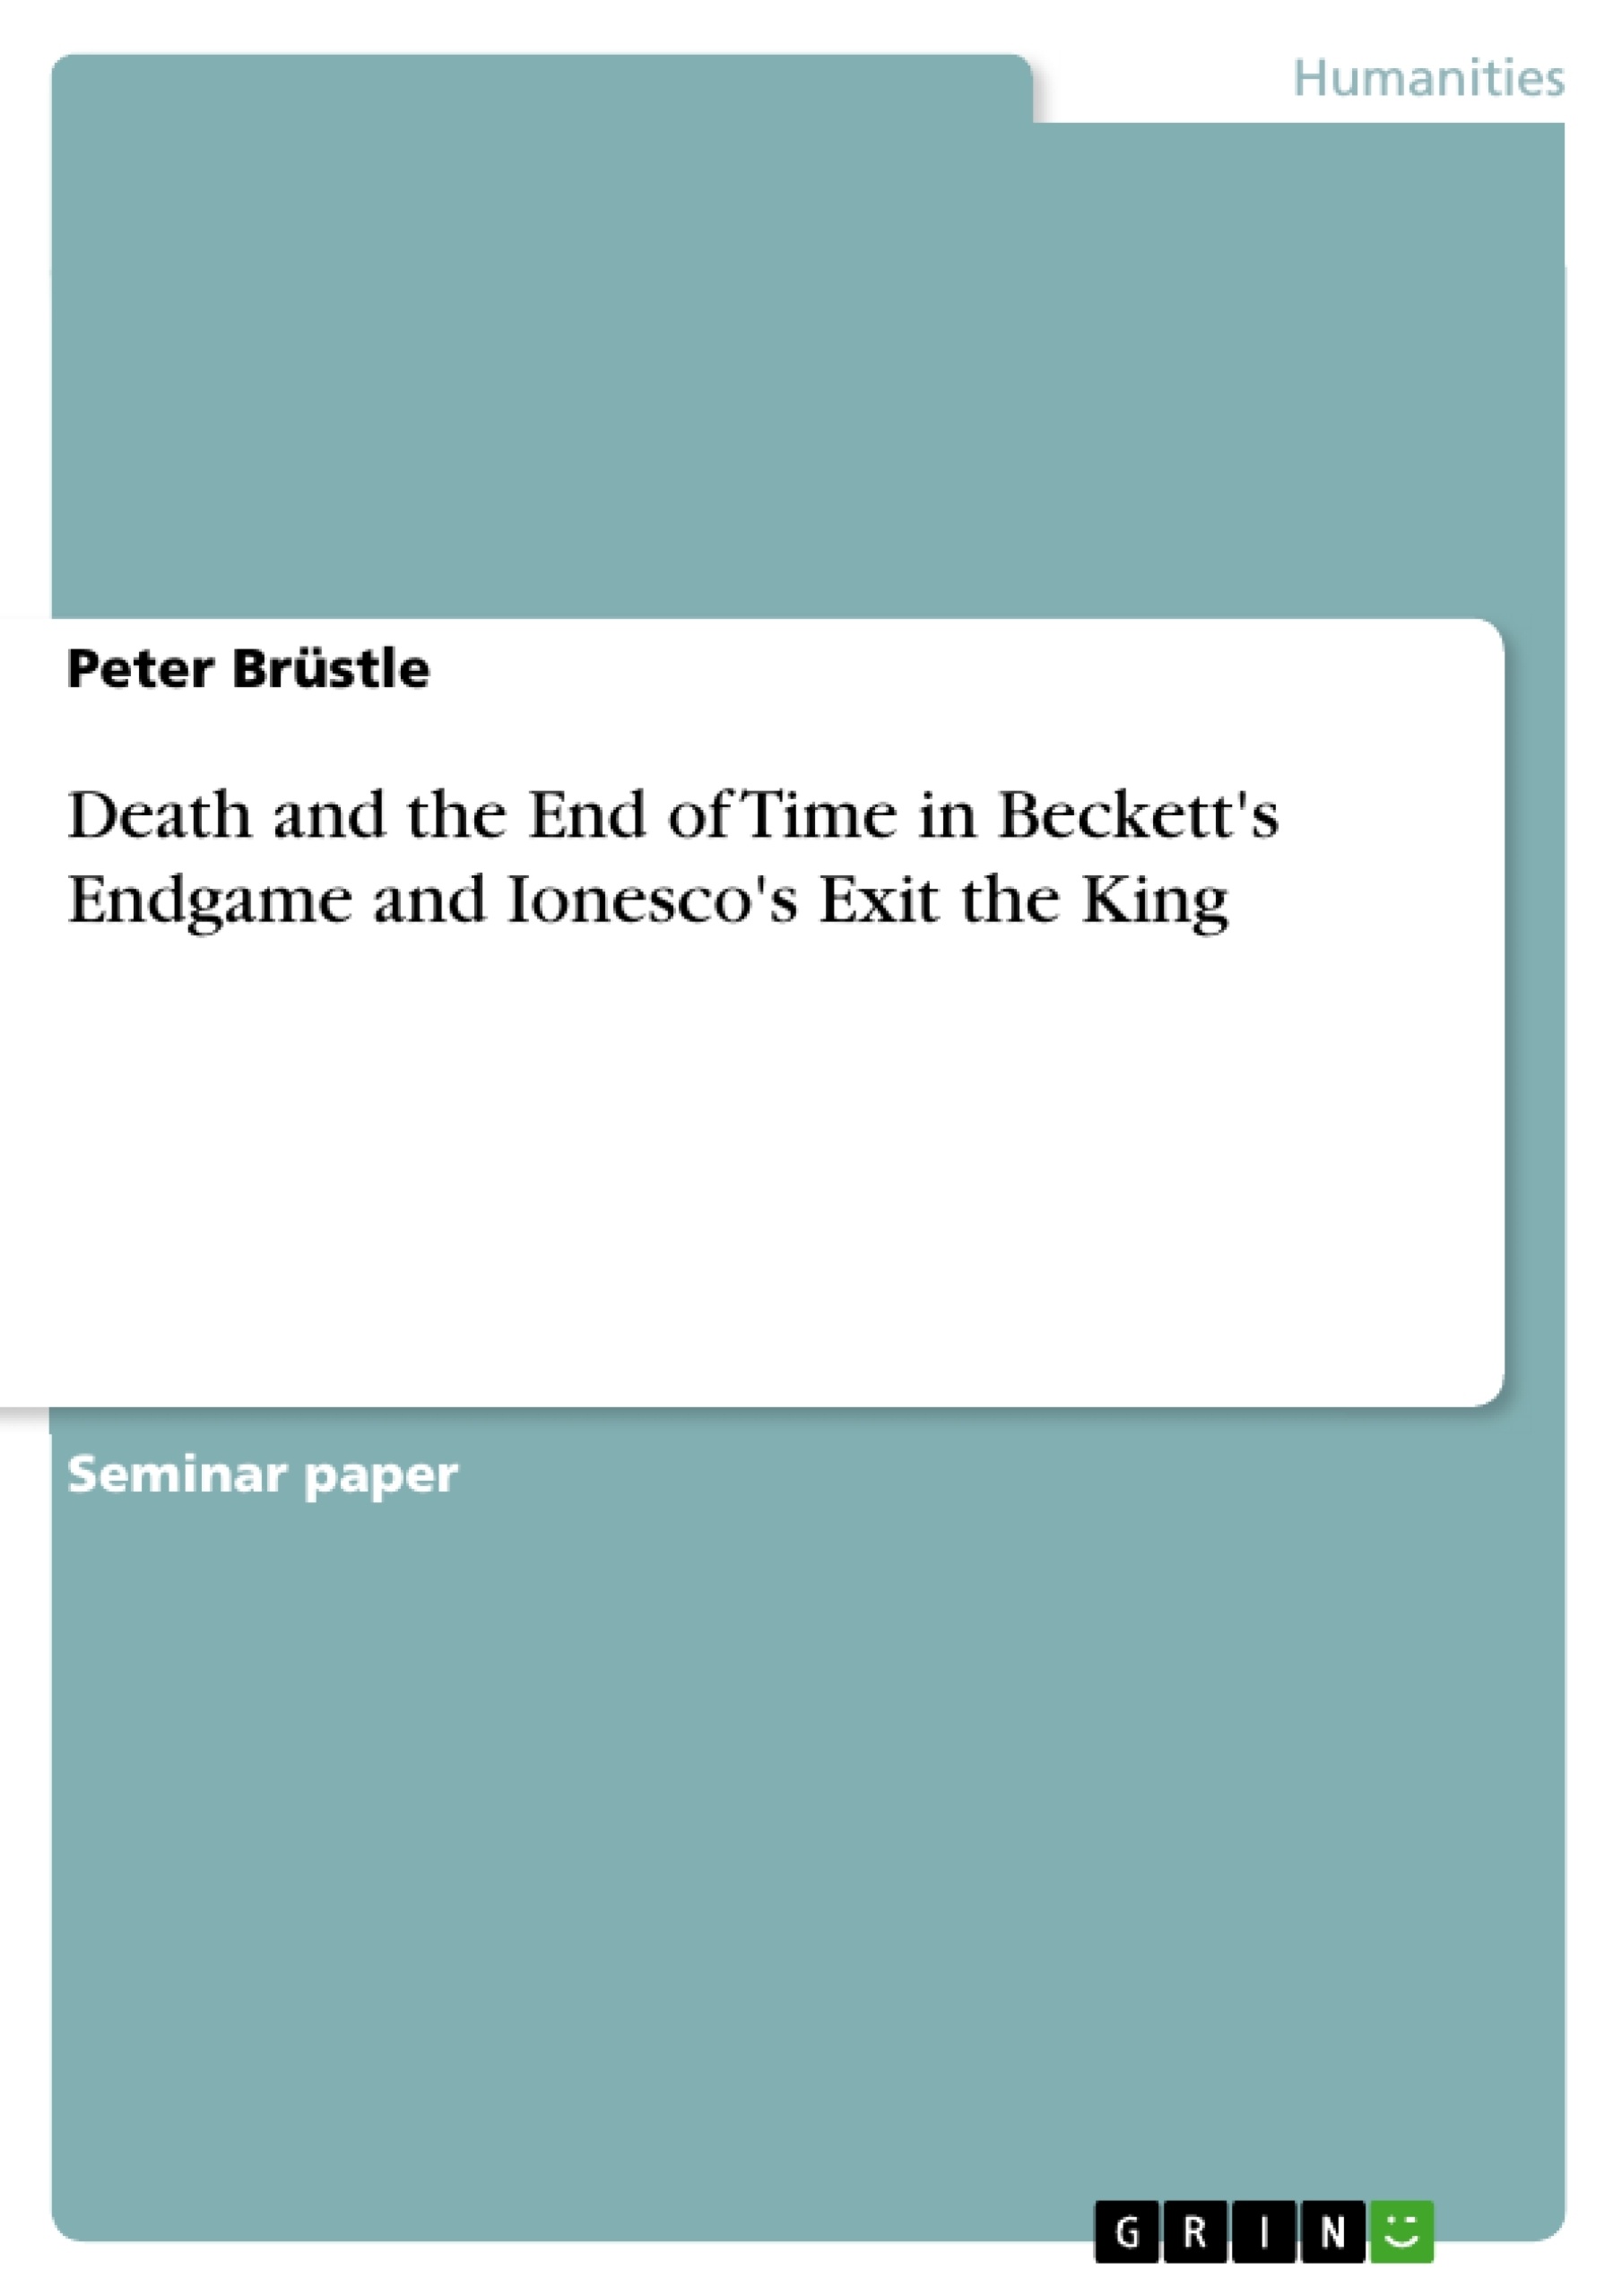 Título: Death and the End of Time in Beckett's Endgame and Ionesco's Exit the King